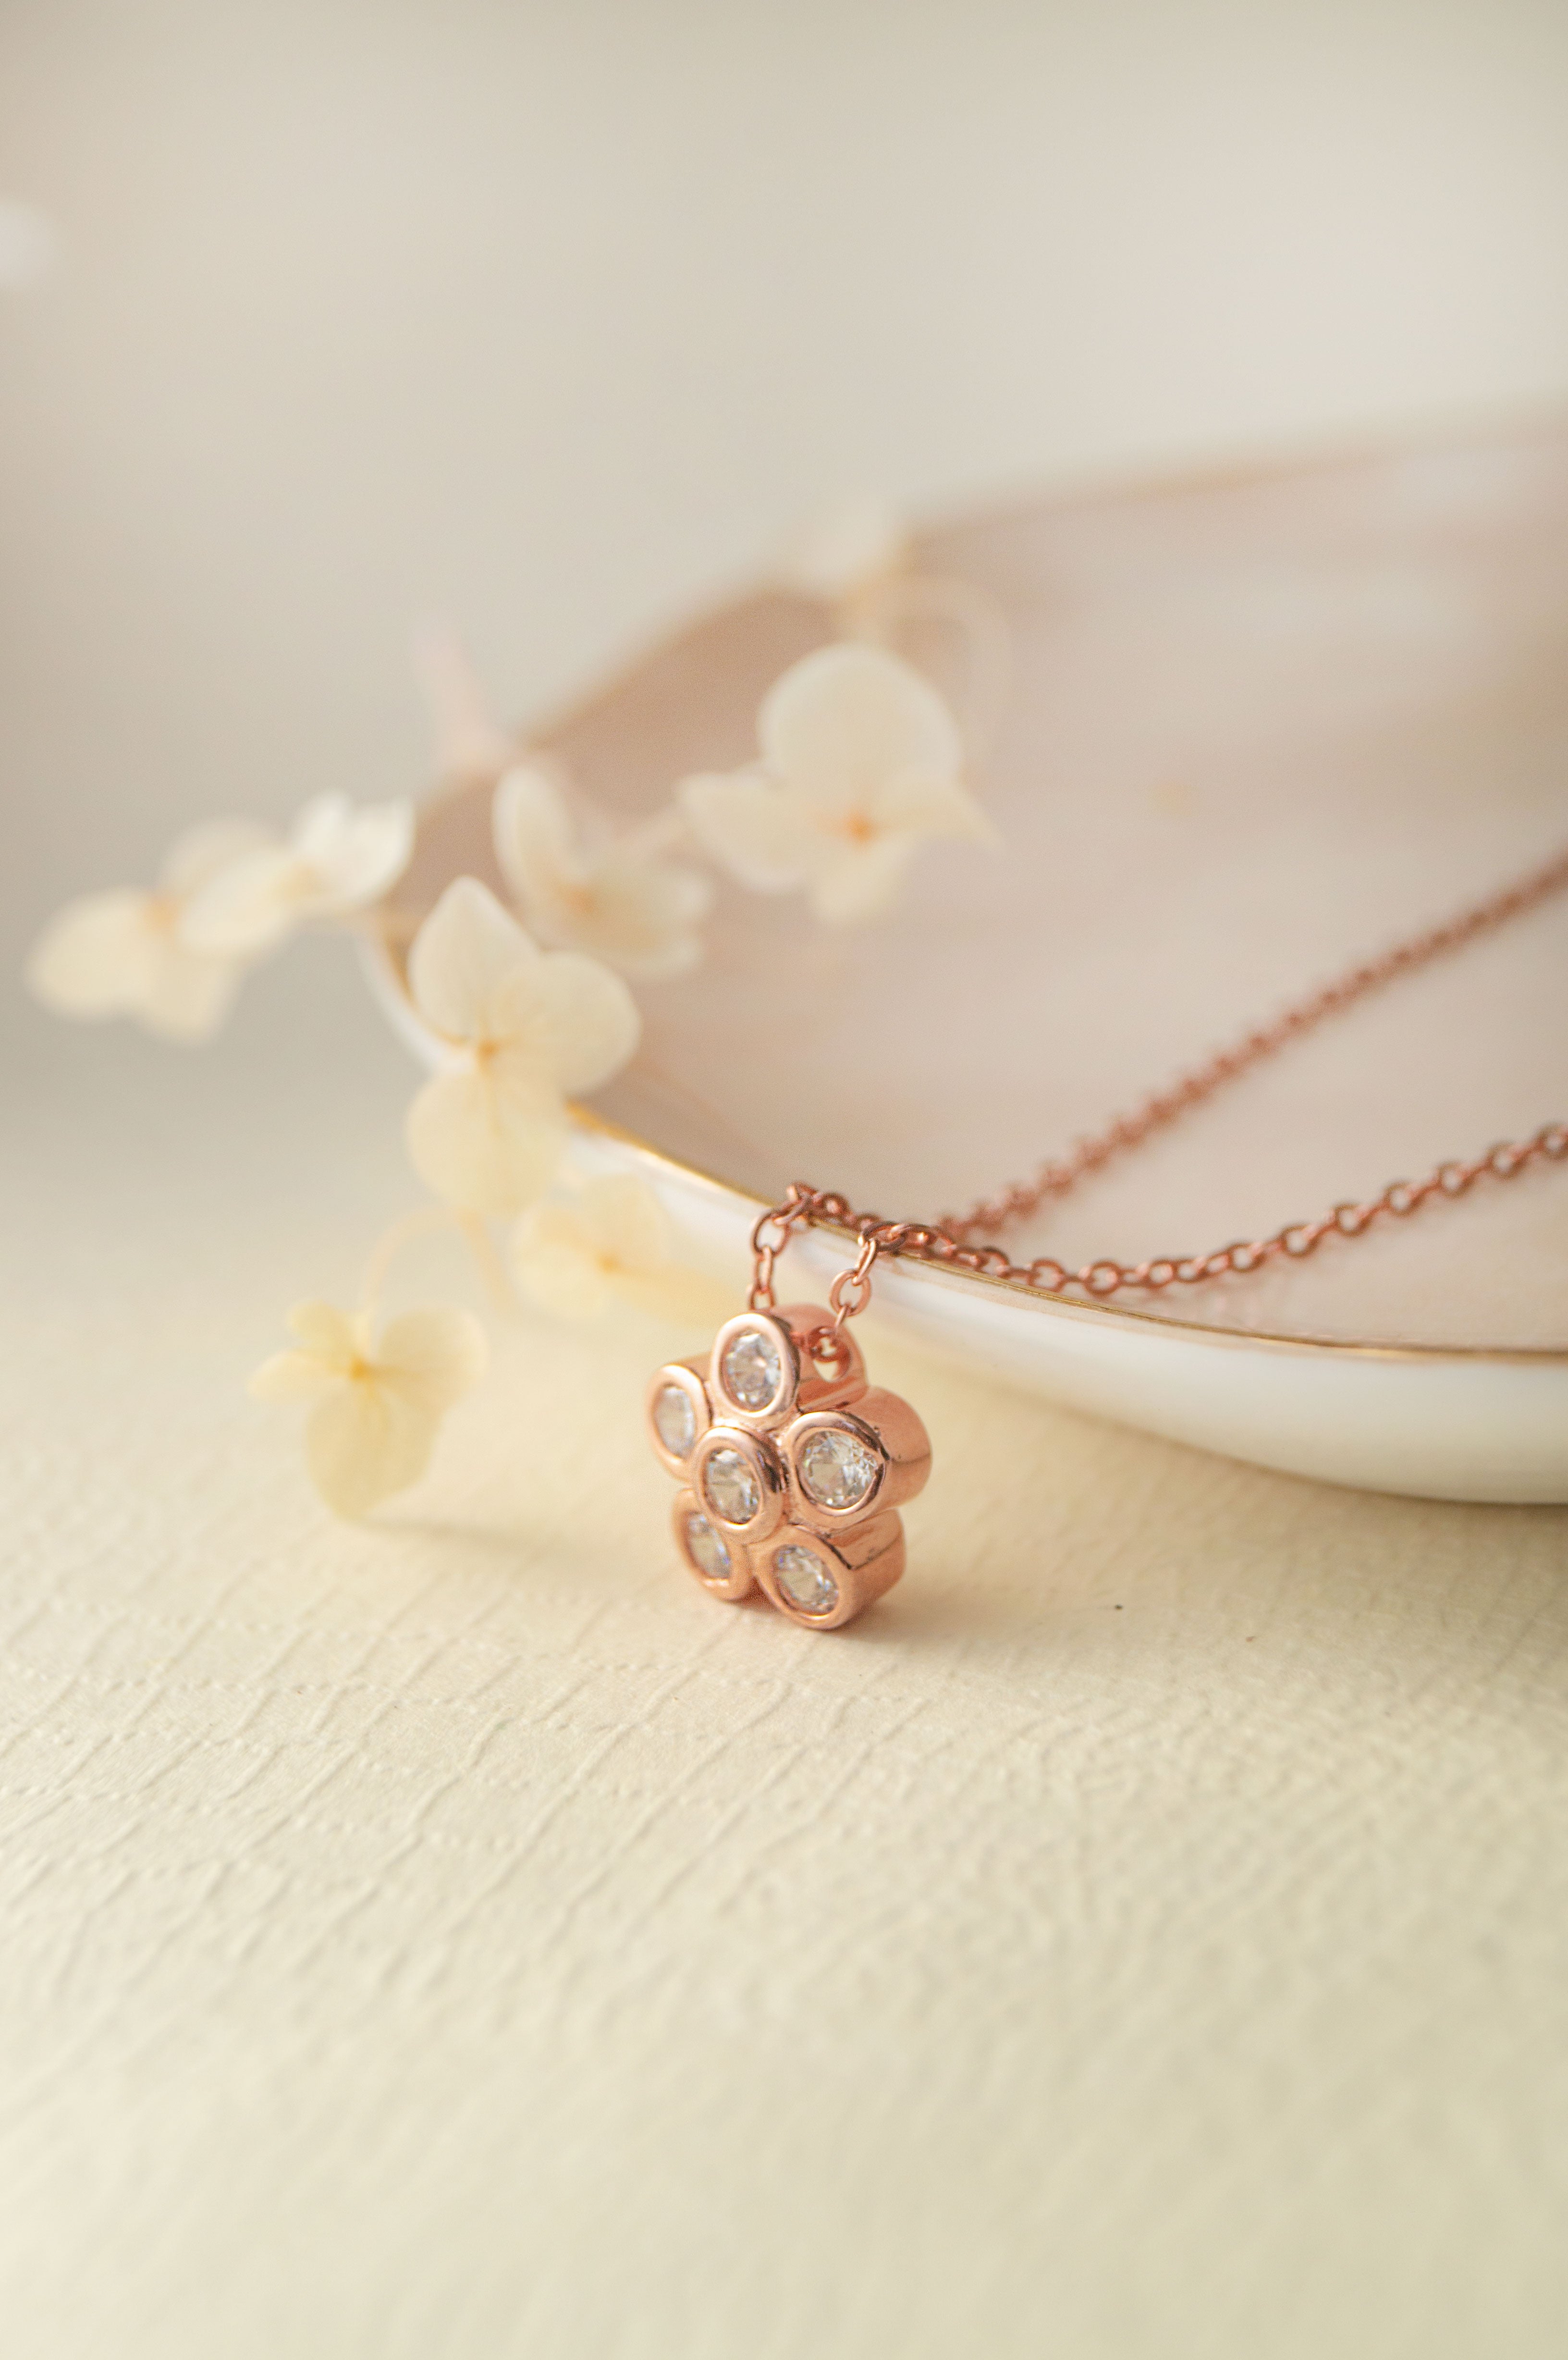 Buy the Rose Gold Leaf Pendant with Chain - Silberry